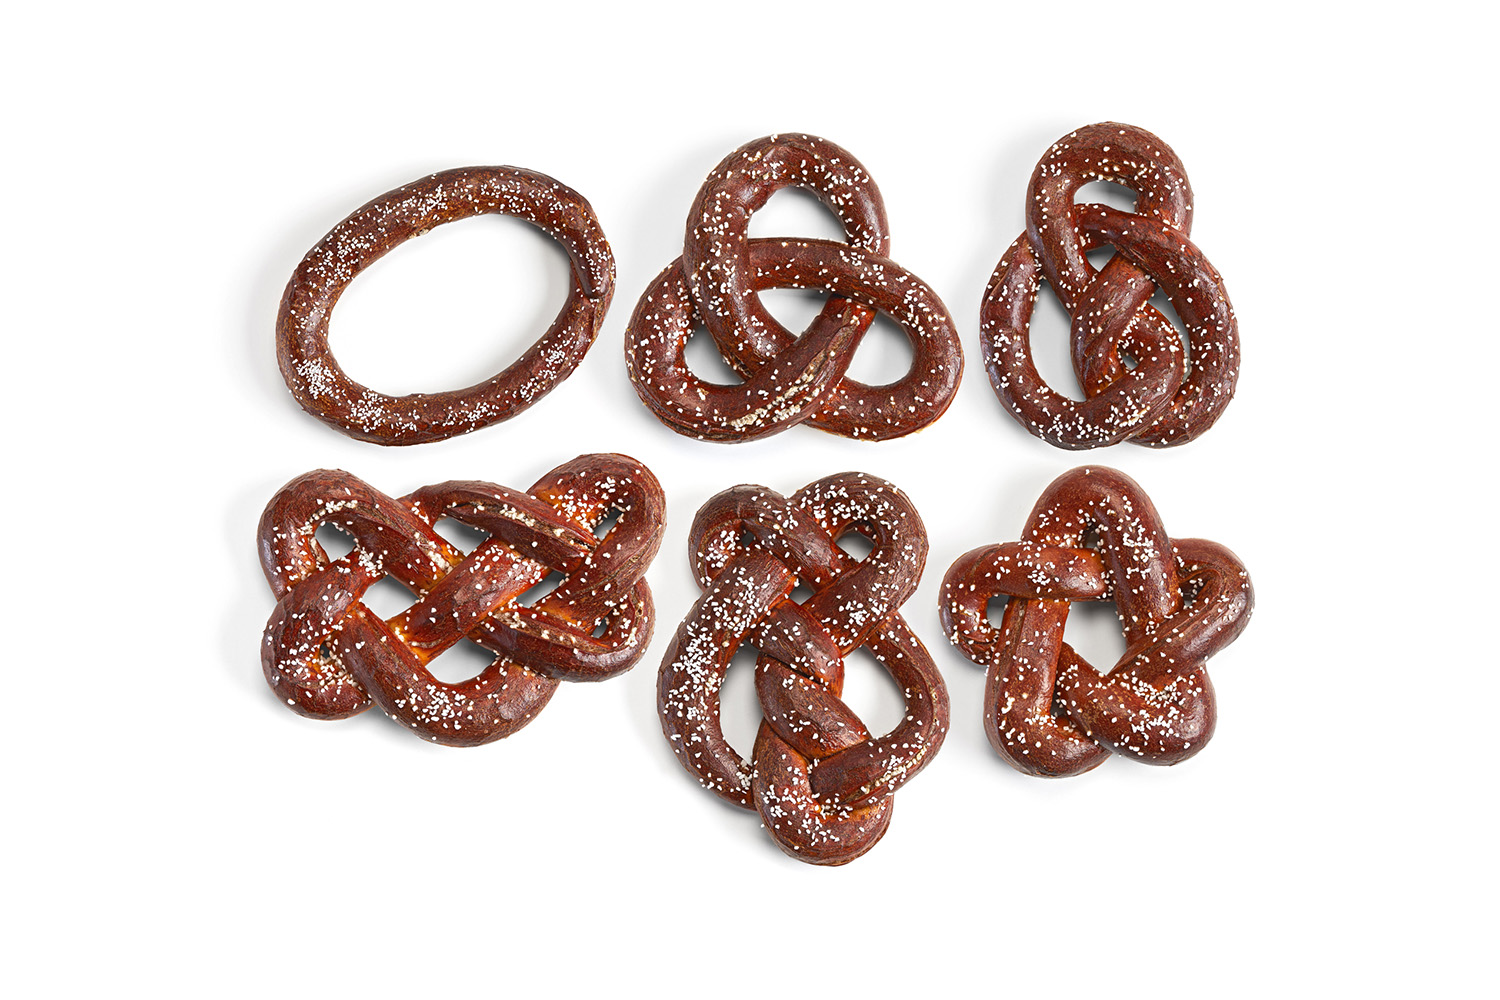 Knot Theory Pretzels from Modernist Bread